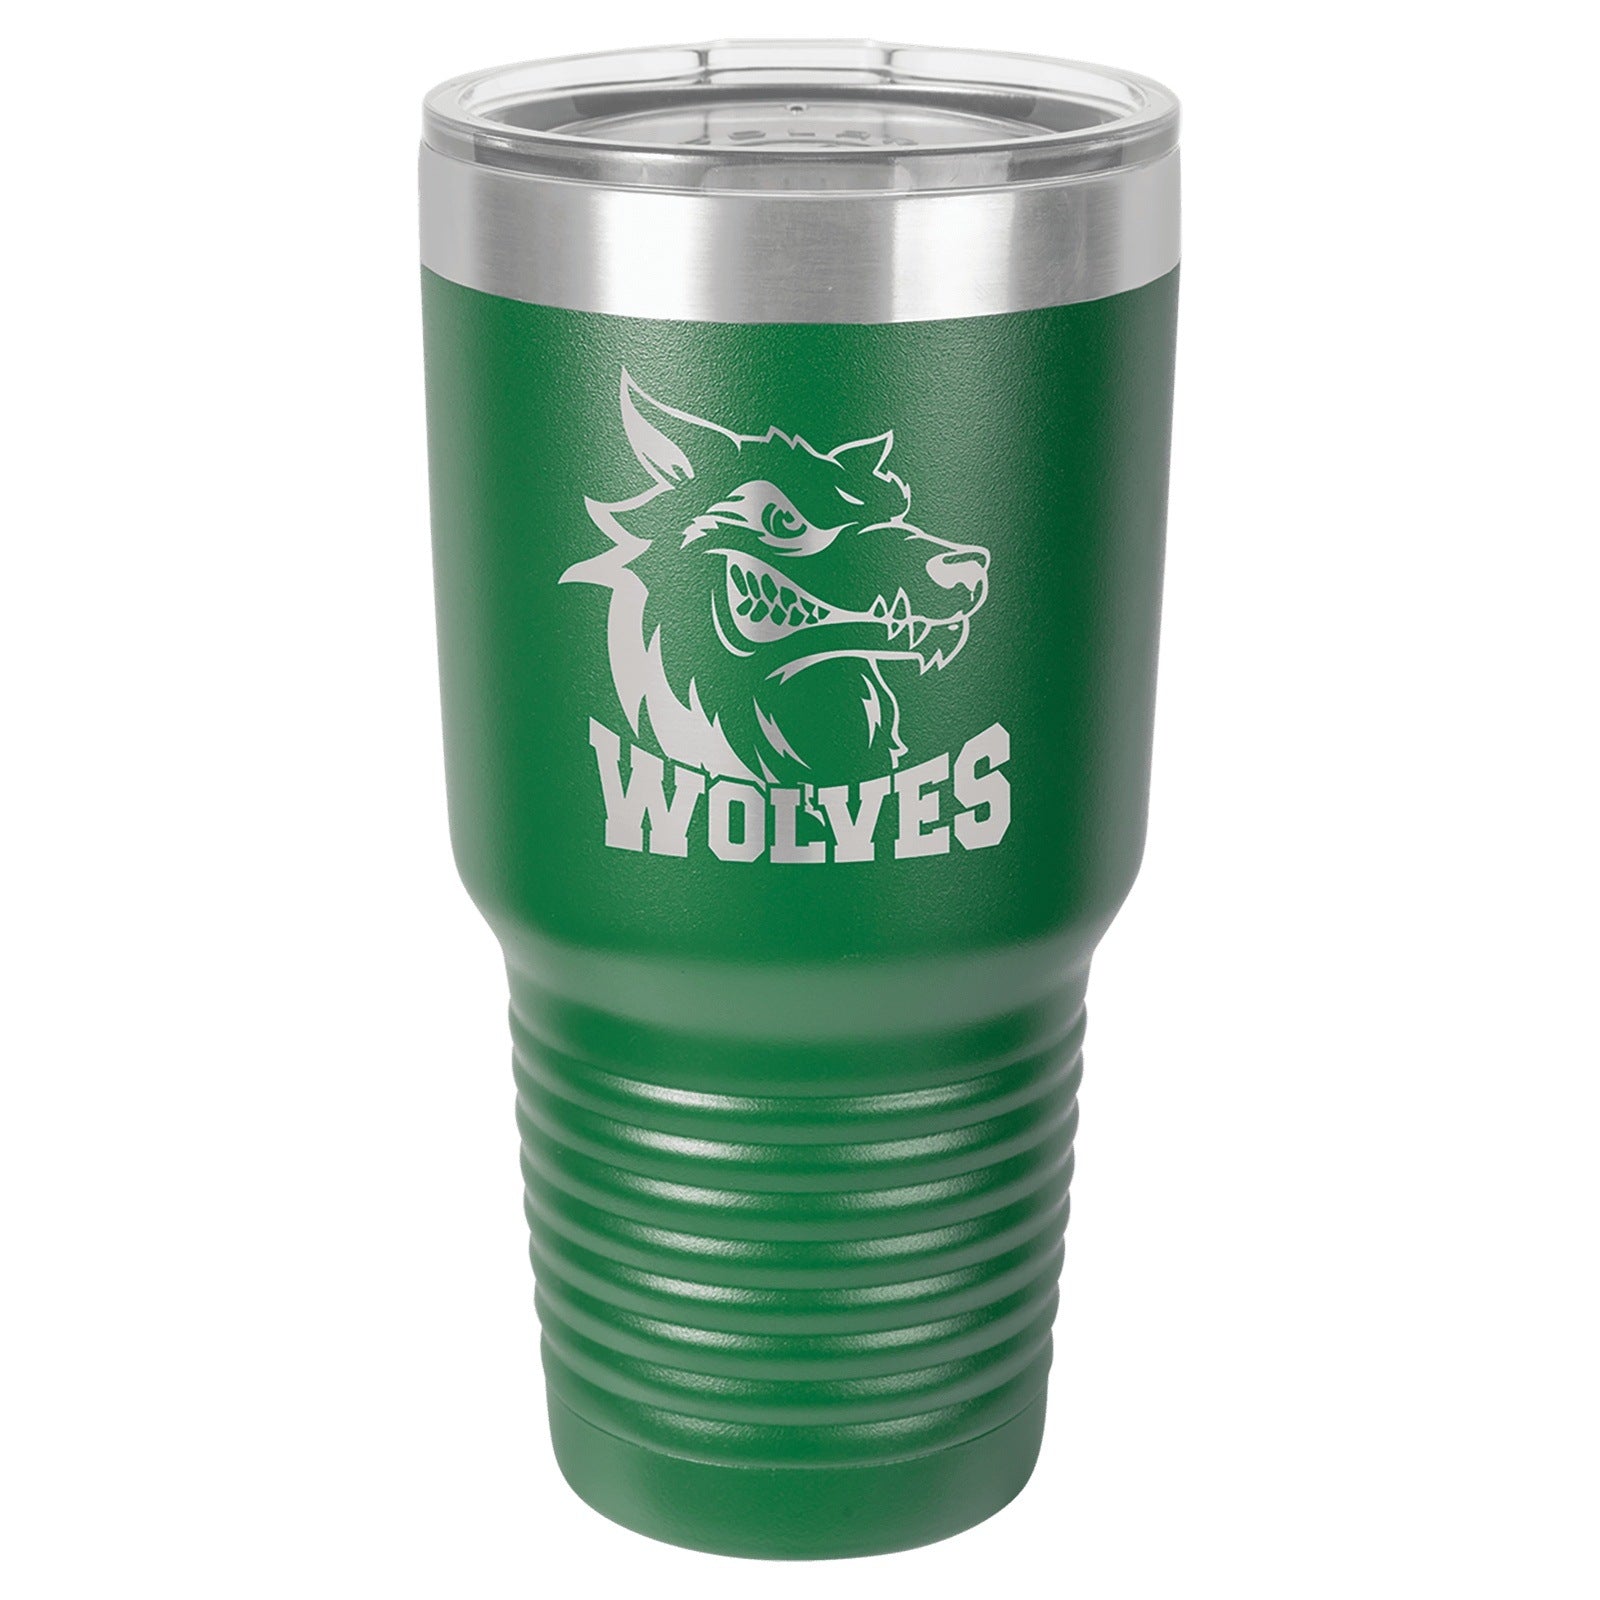 Personalized 30oz Tumbler, ADD YOUR LOGO, Laser Engraved Cup, Corporate Gift, Branded, Powder Coated, Bulk Tumblers